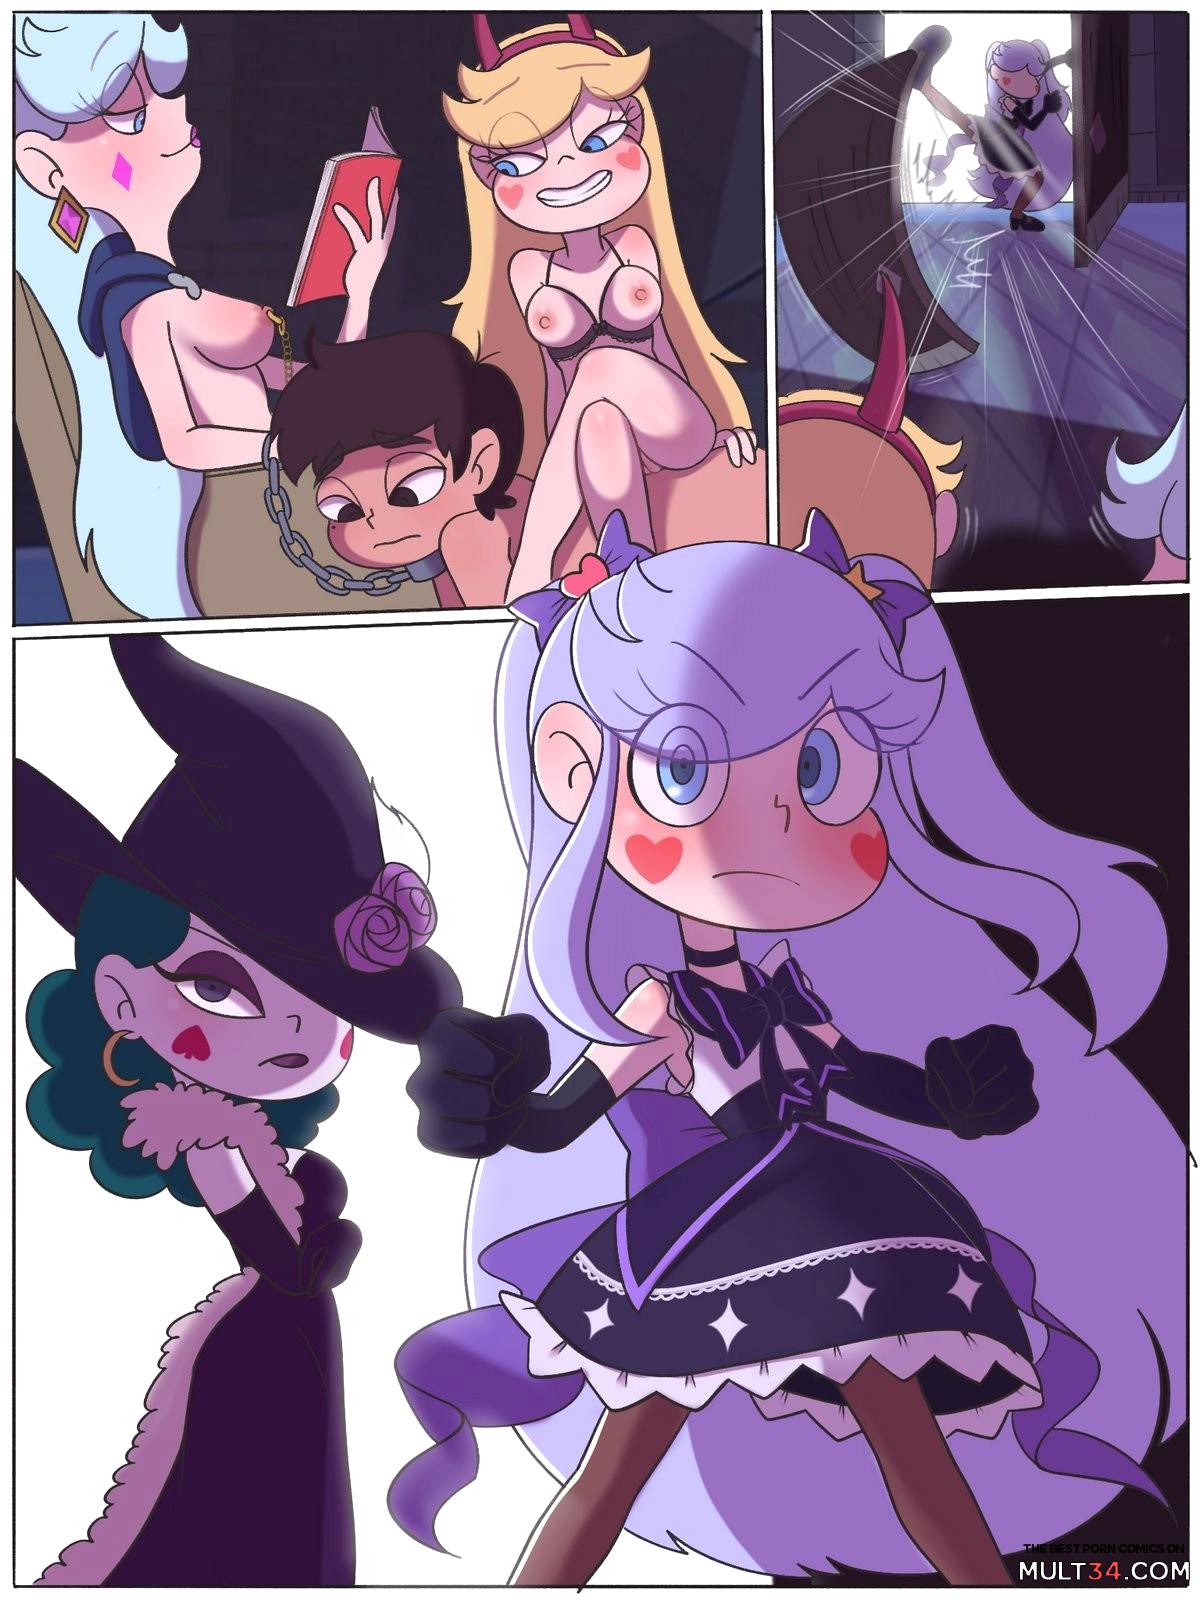 Star VS The forces of Evil comics page 34